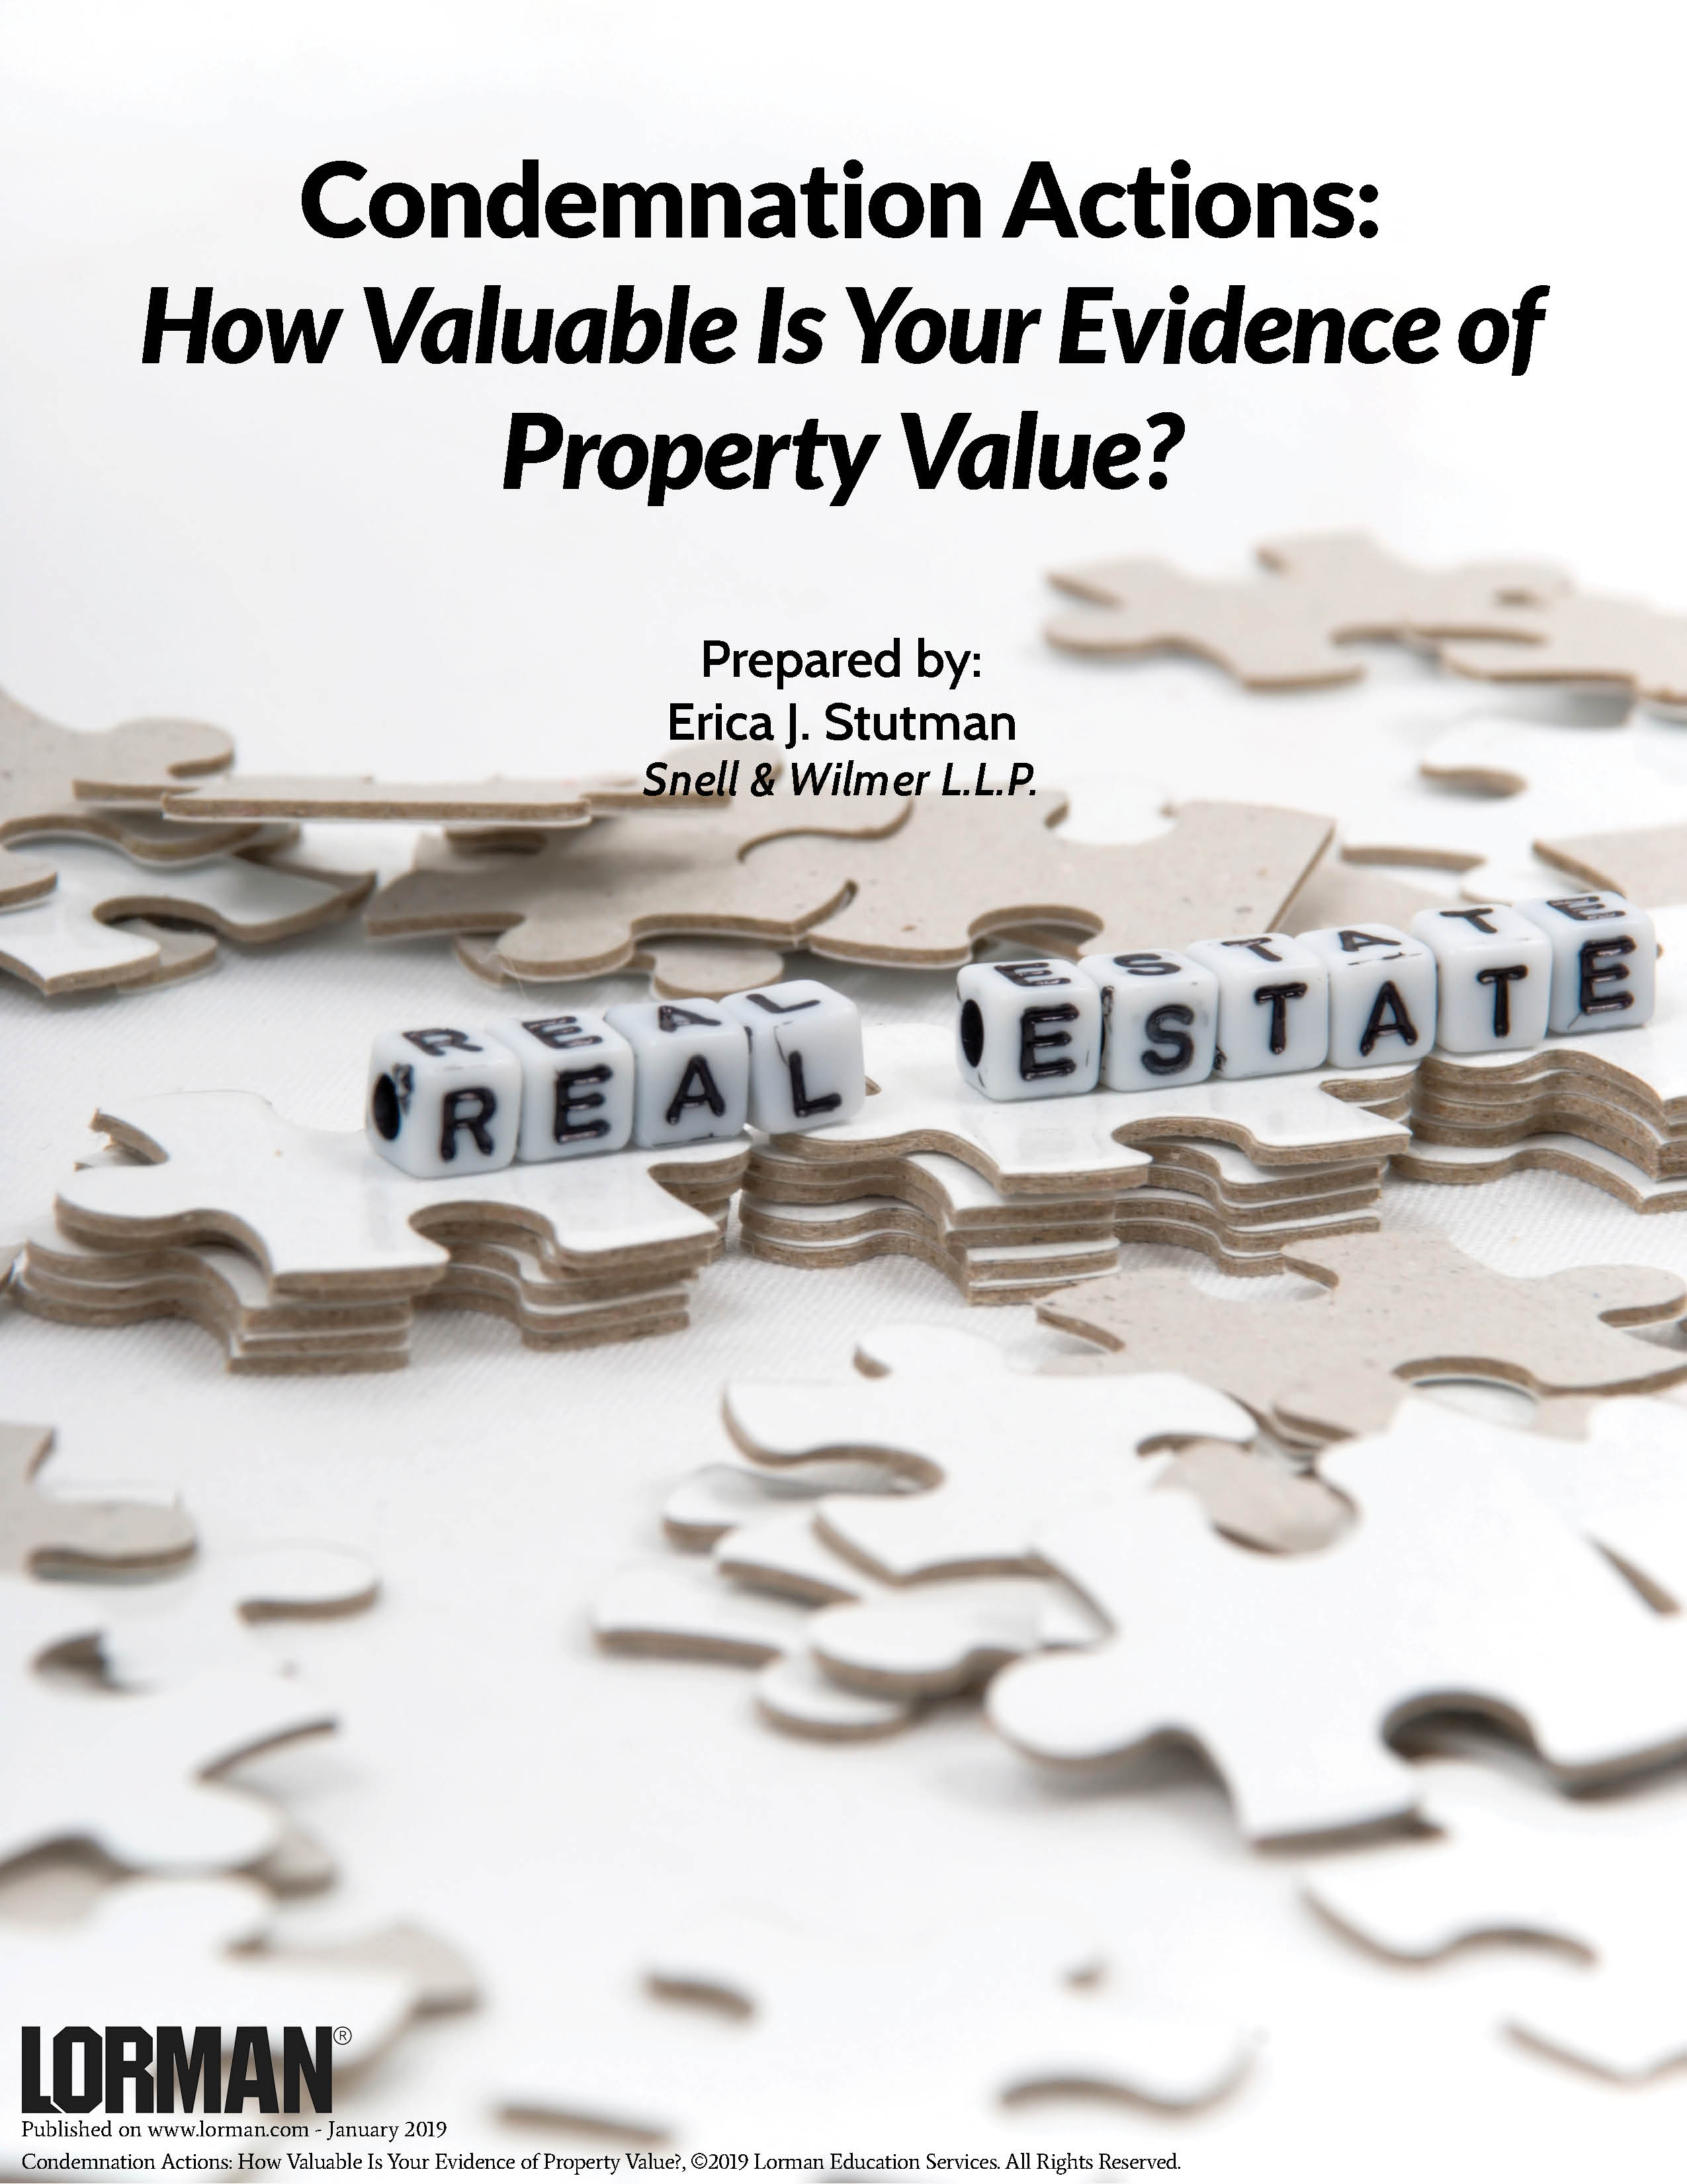 Condemnation Actions: How Valuable Is Your Evidence of Property Value?